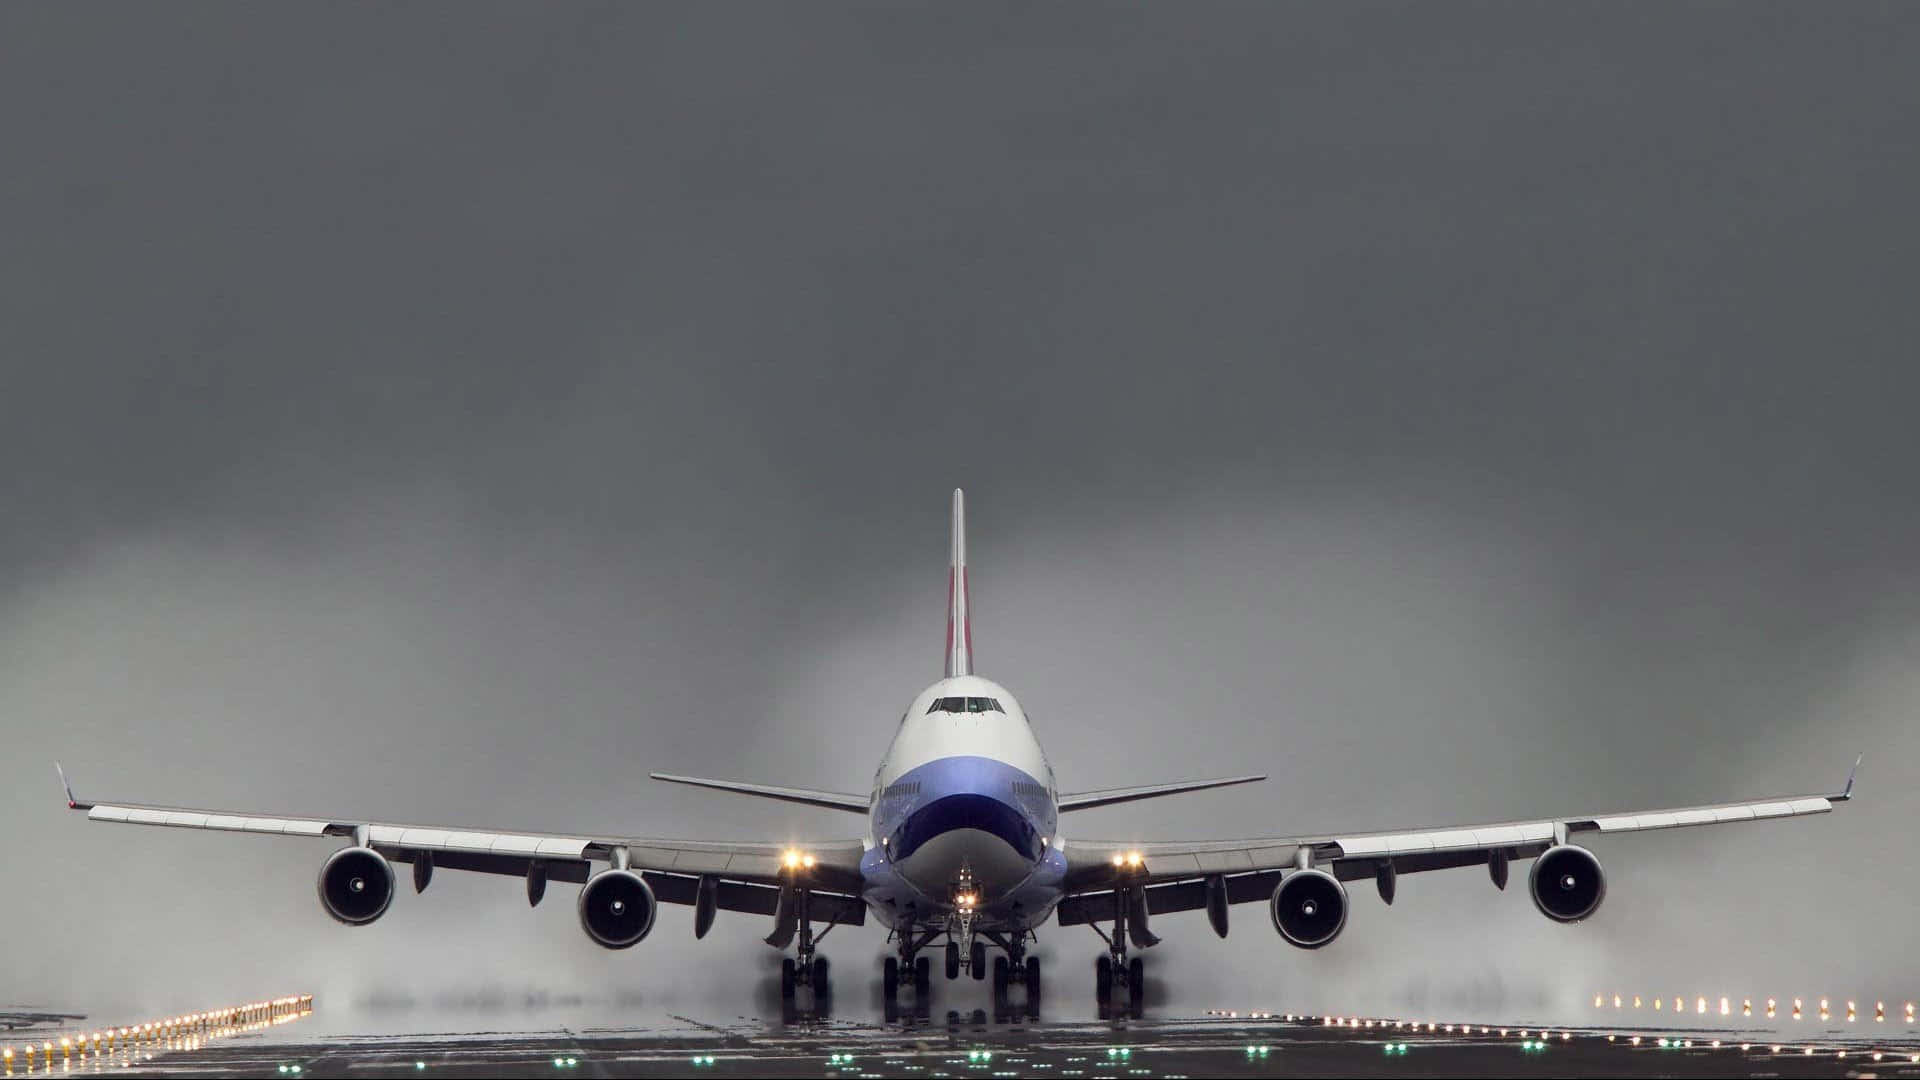 A Majestic Boeing 747 Airplane Seen From Below, Flying Through the Clouds. Wallpaper